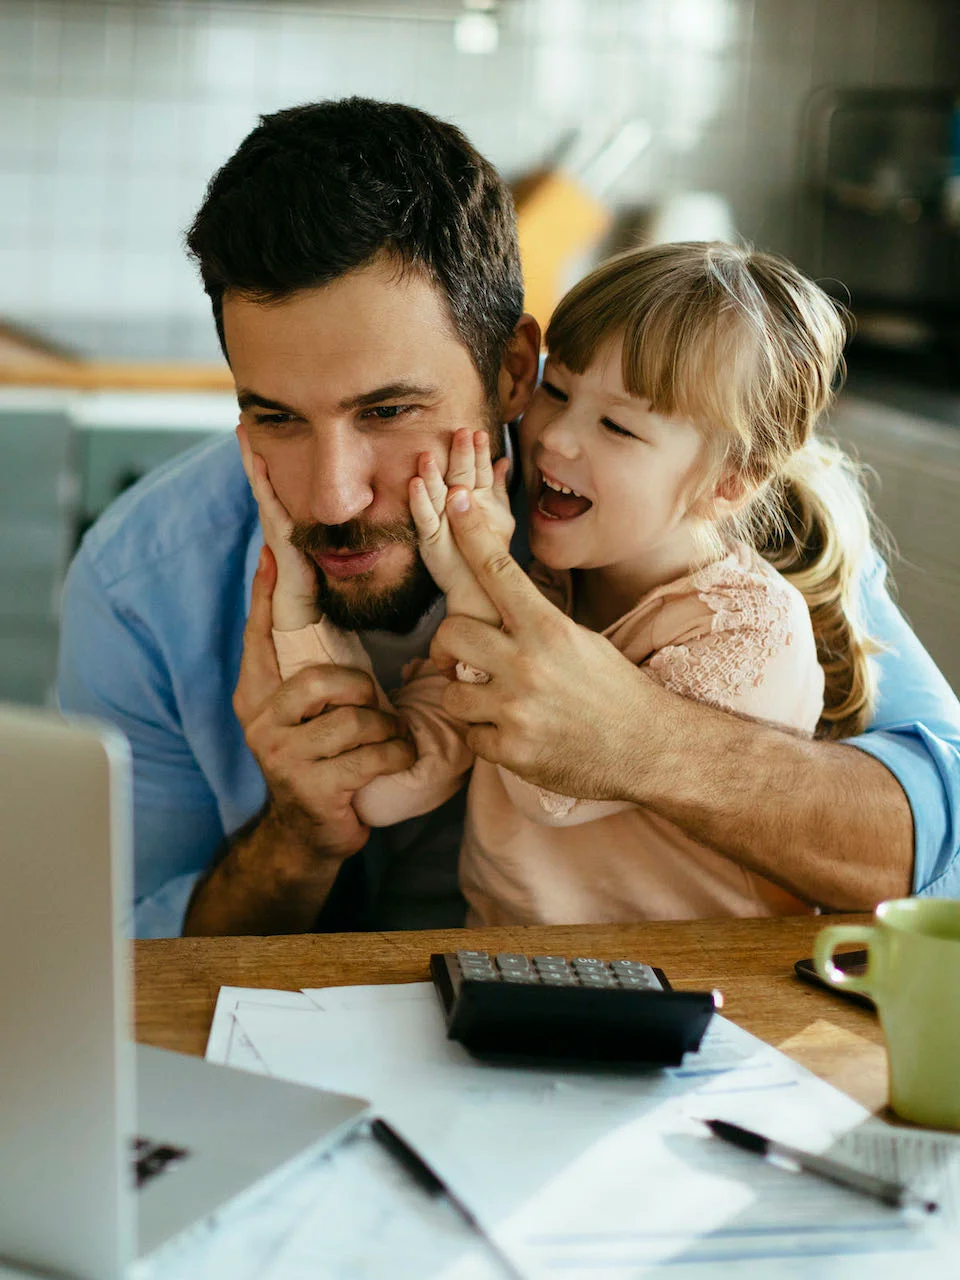 Father working on finances while entertaining his daughter